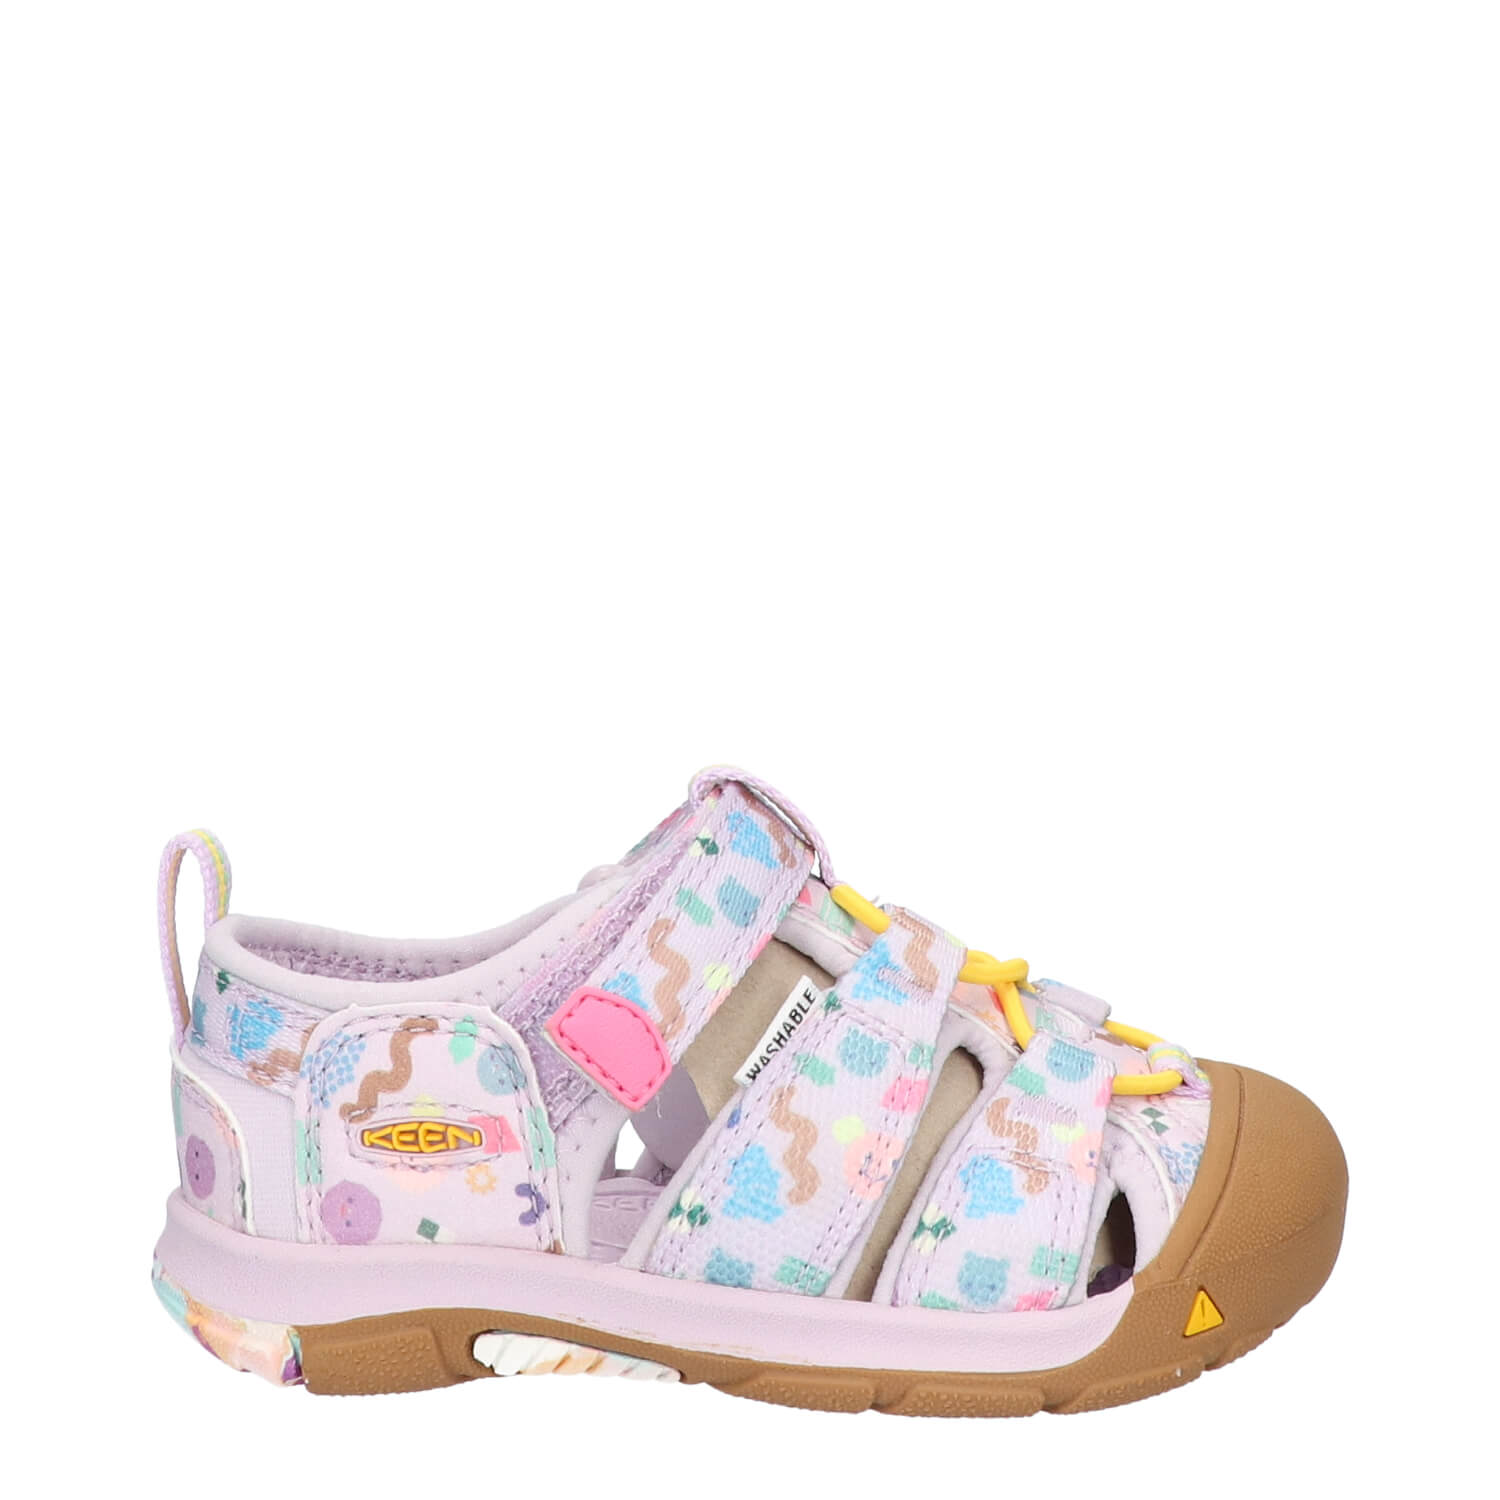 Newport H2 Toddlers Sandalen Tiny Candy